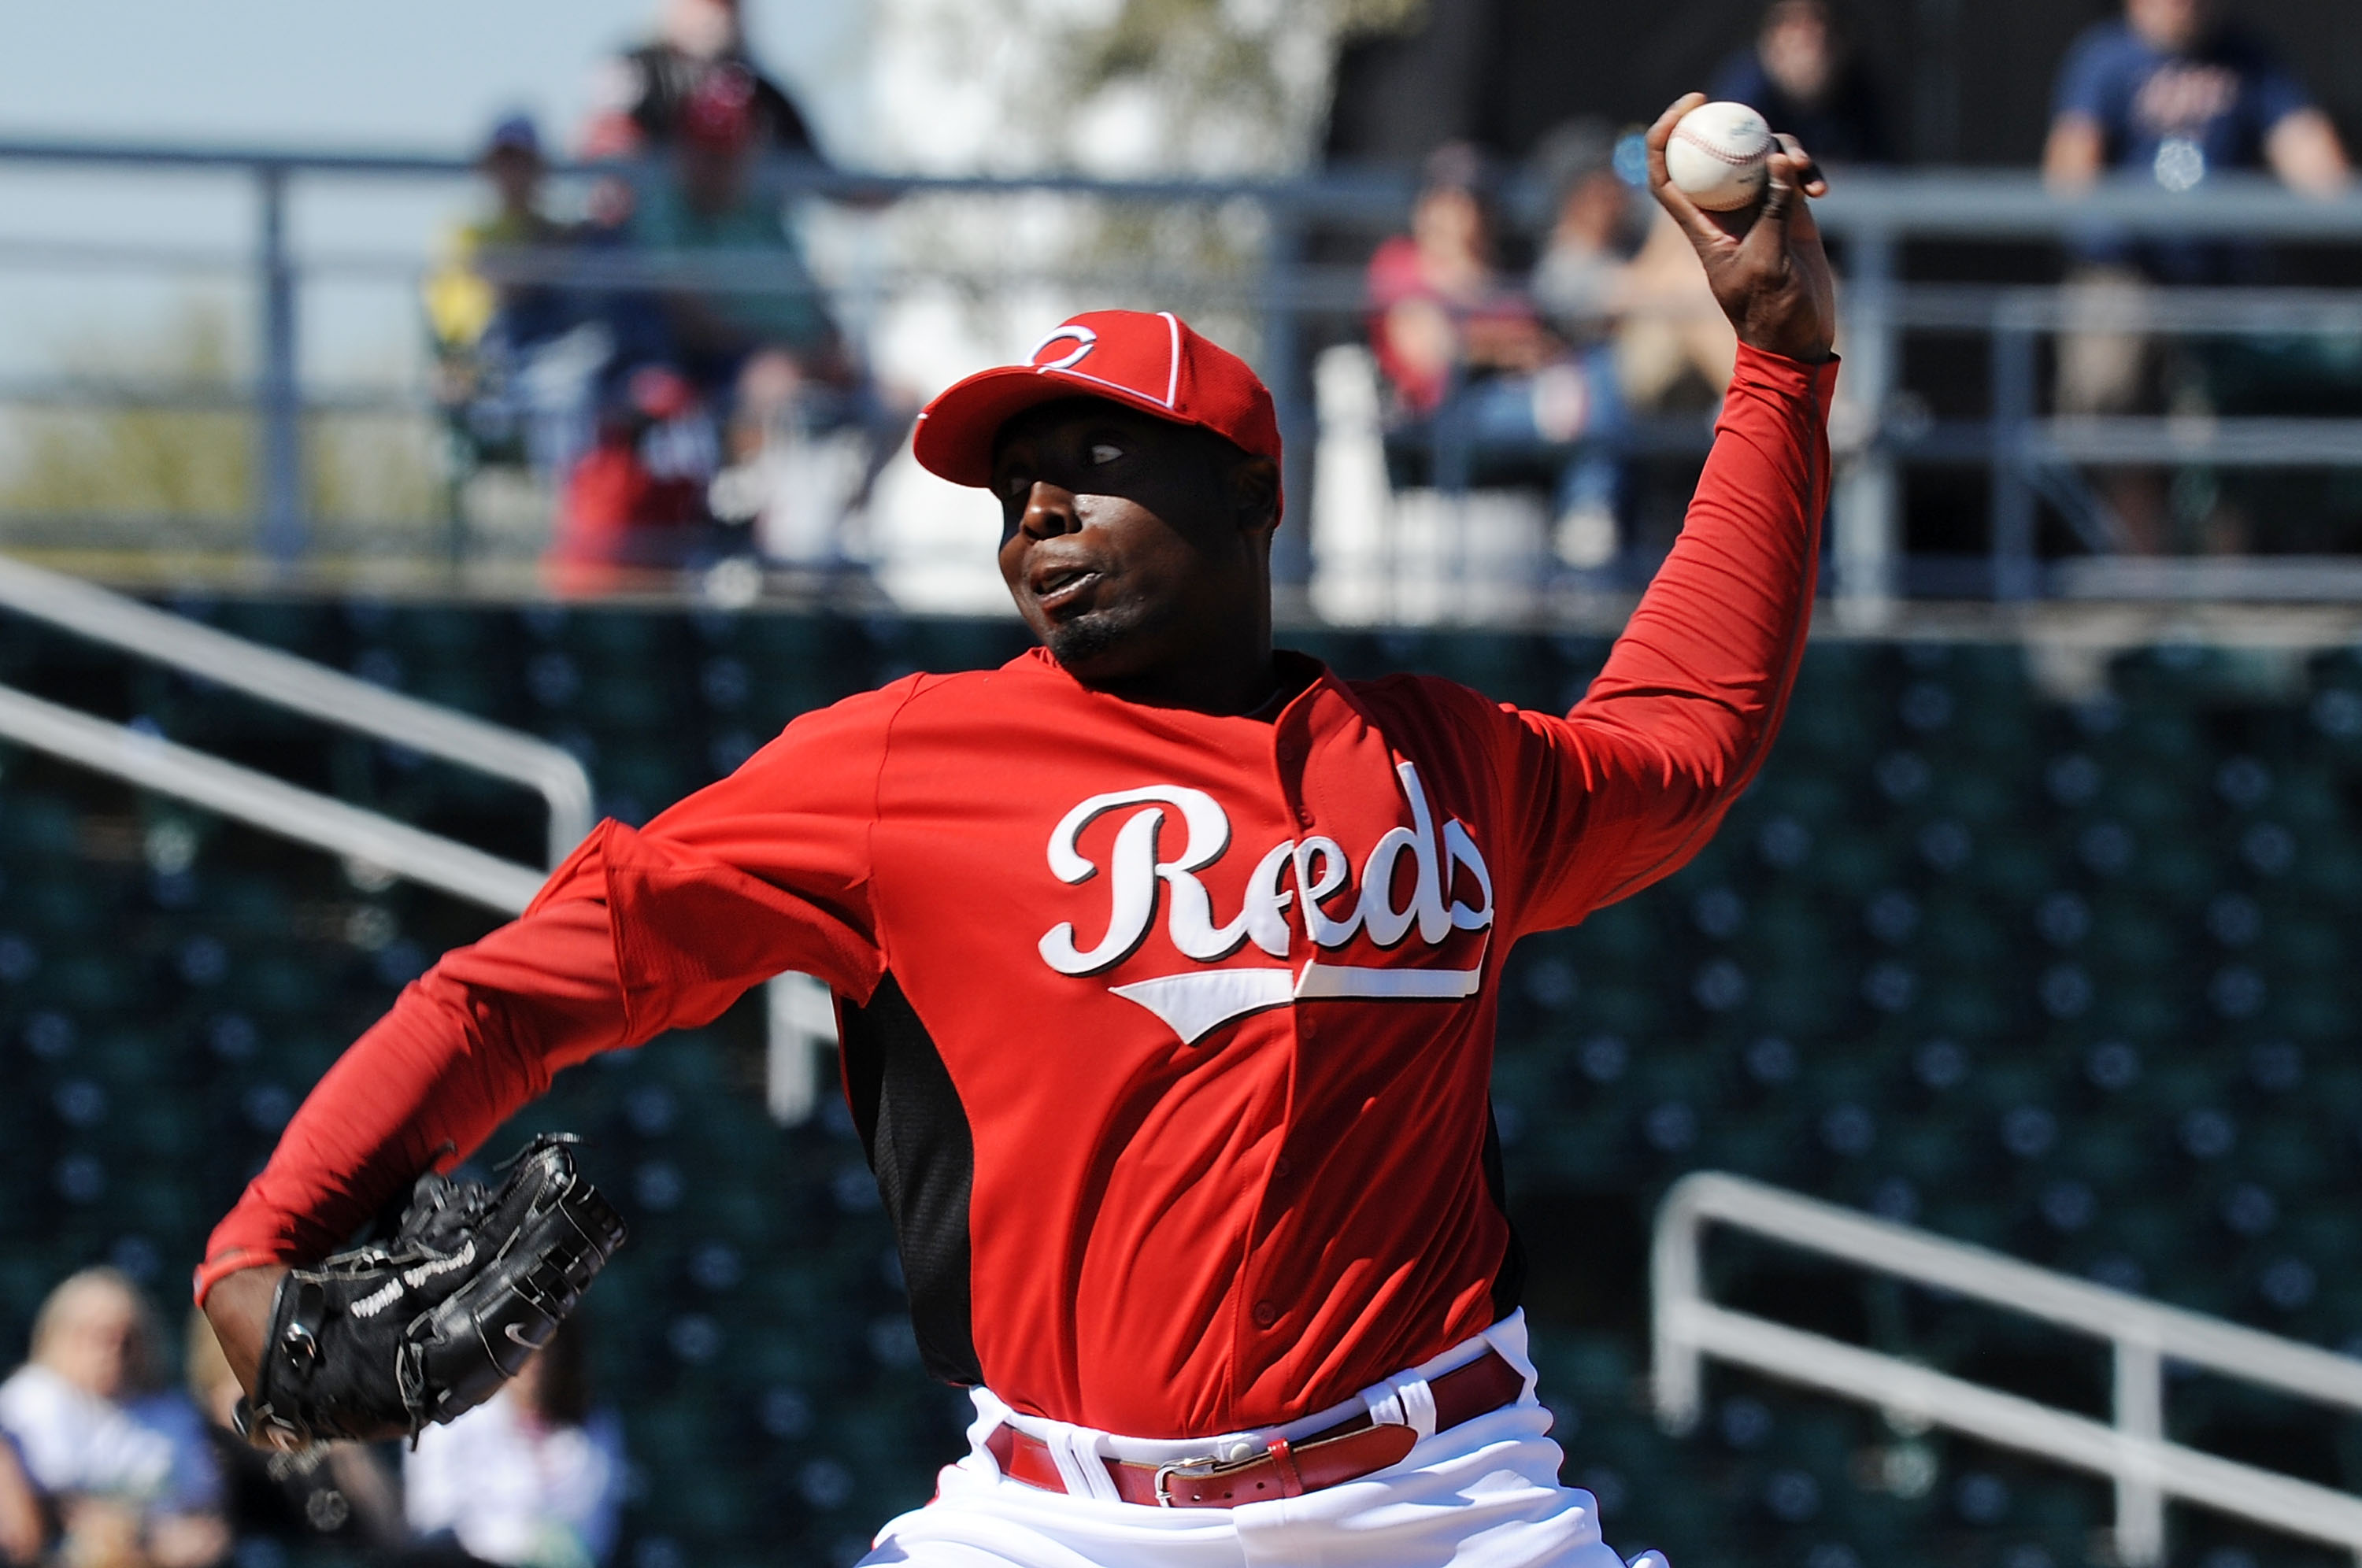 GOODYEAR, AZ - FEBRUARY 28:  Dontrelle Willis #50 of the Cincinnati Reds delivers a pitch against the Cleveland Indians at Goodyear Ballpark on February 28, 2011 in Goodyear, Arizona.  (Photo by Norm Hall/Getty Images)